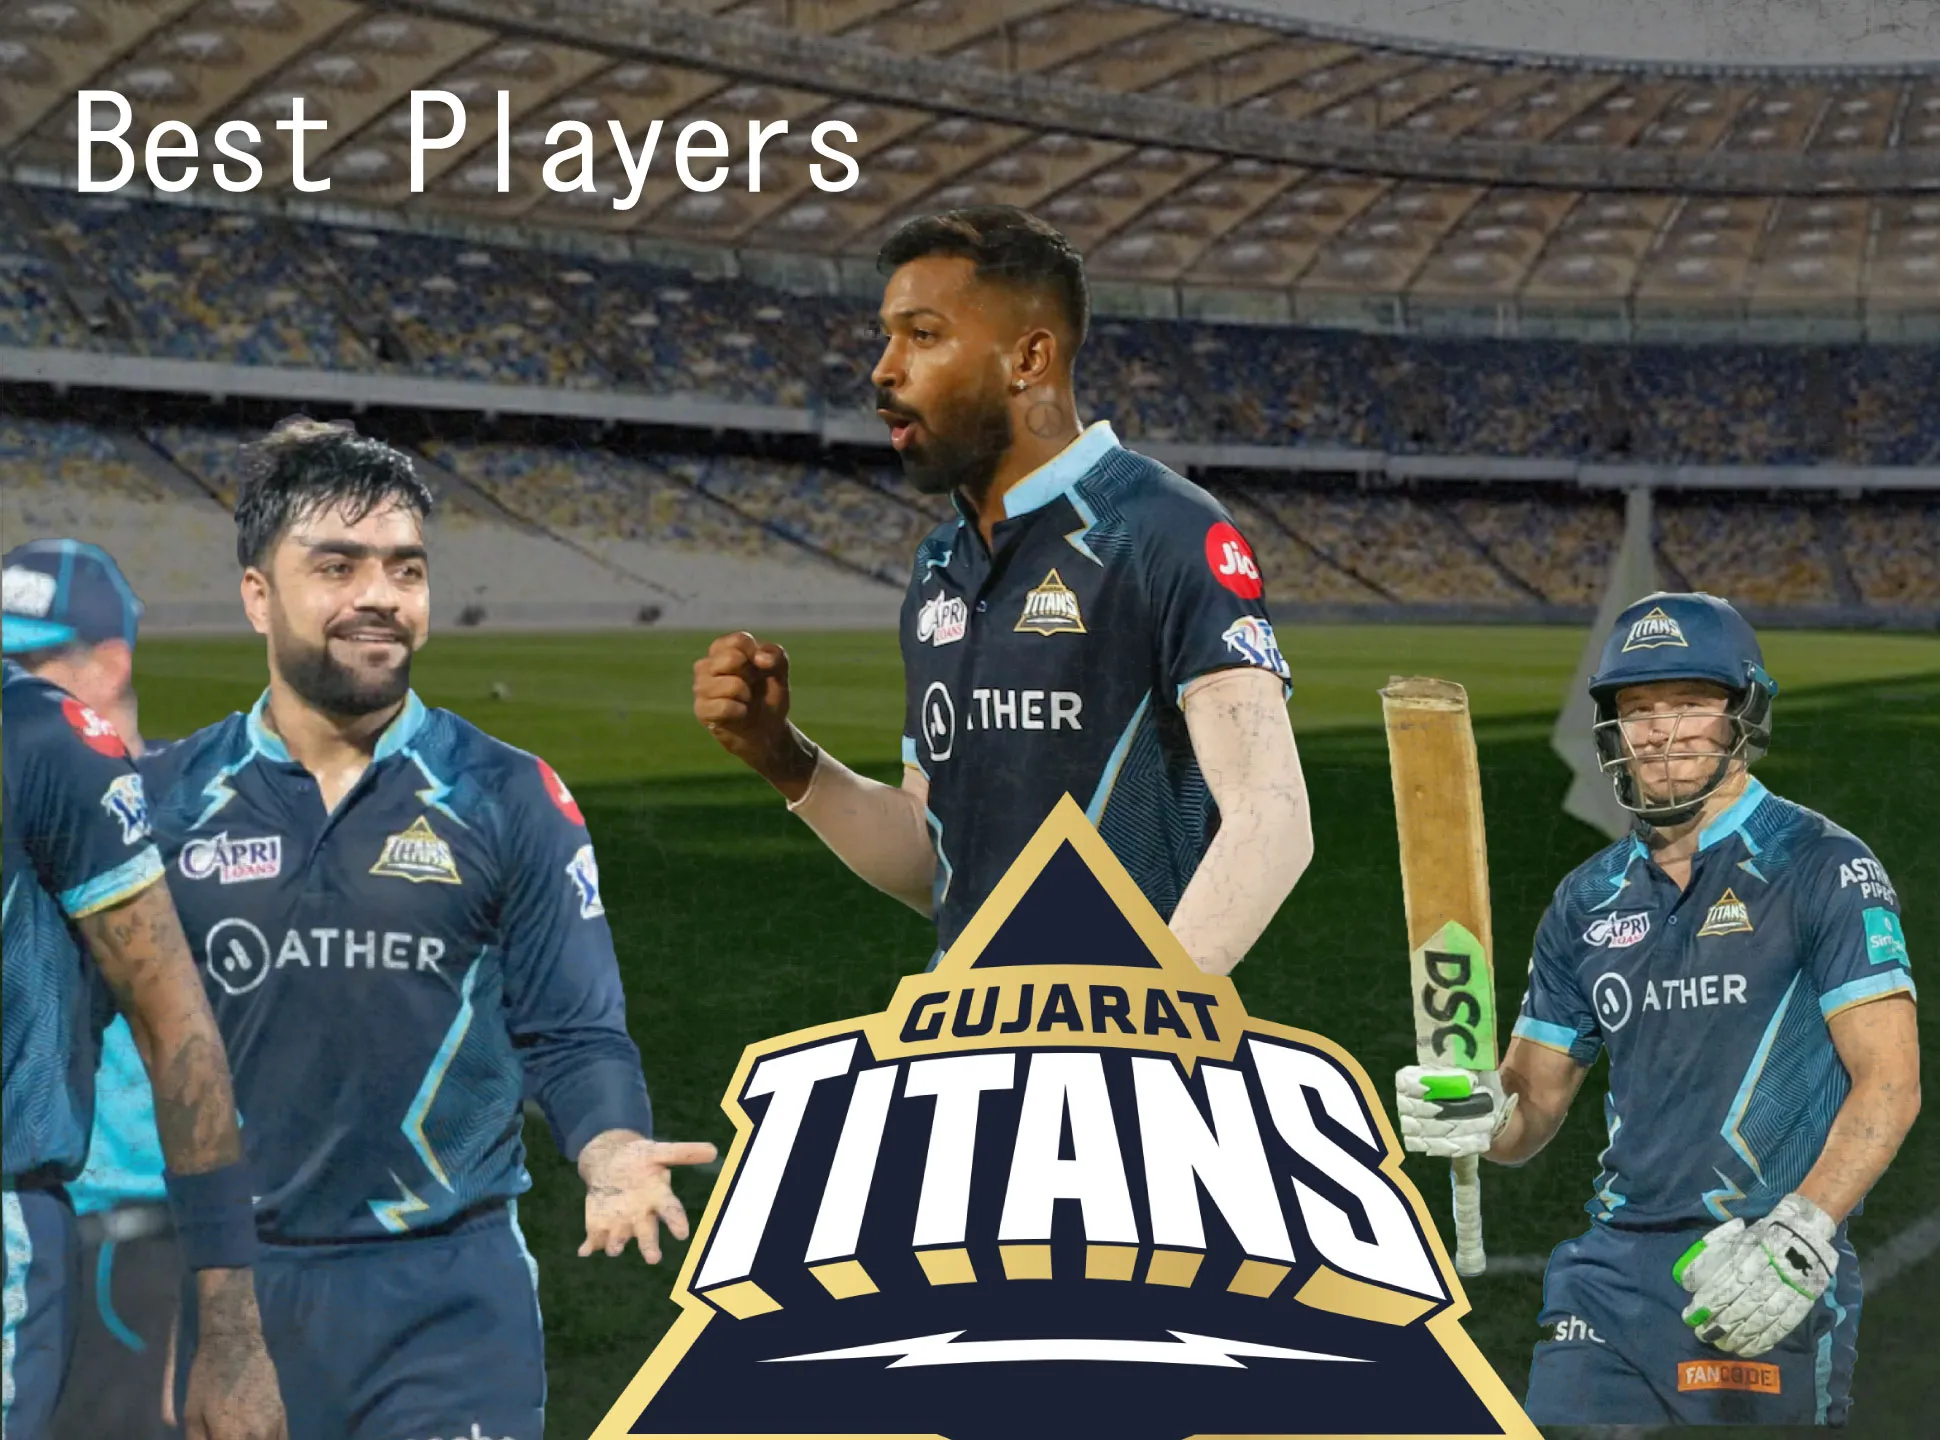 These players will lead Gujarat Titans to the win.